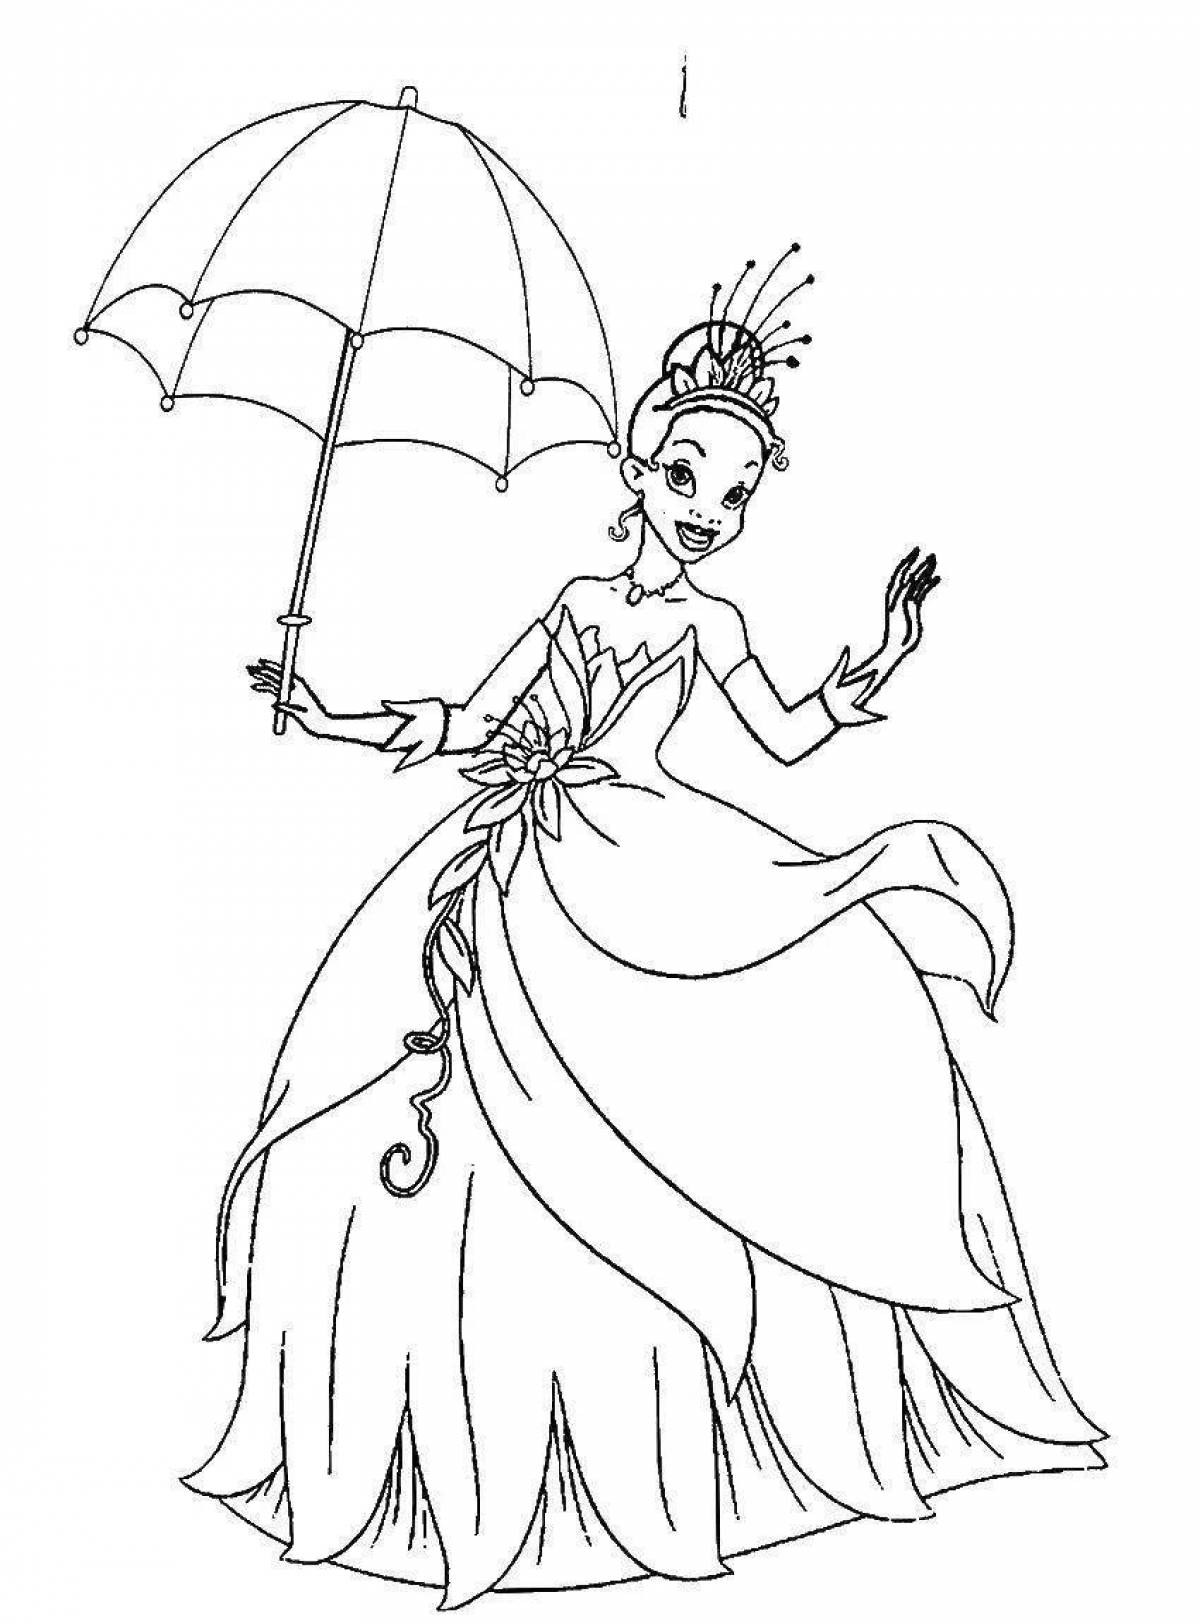 Exquisite tiana coloring page